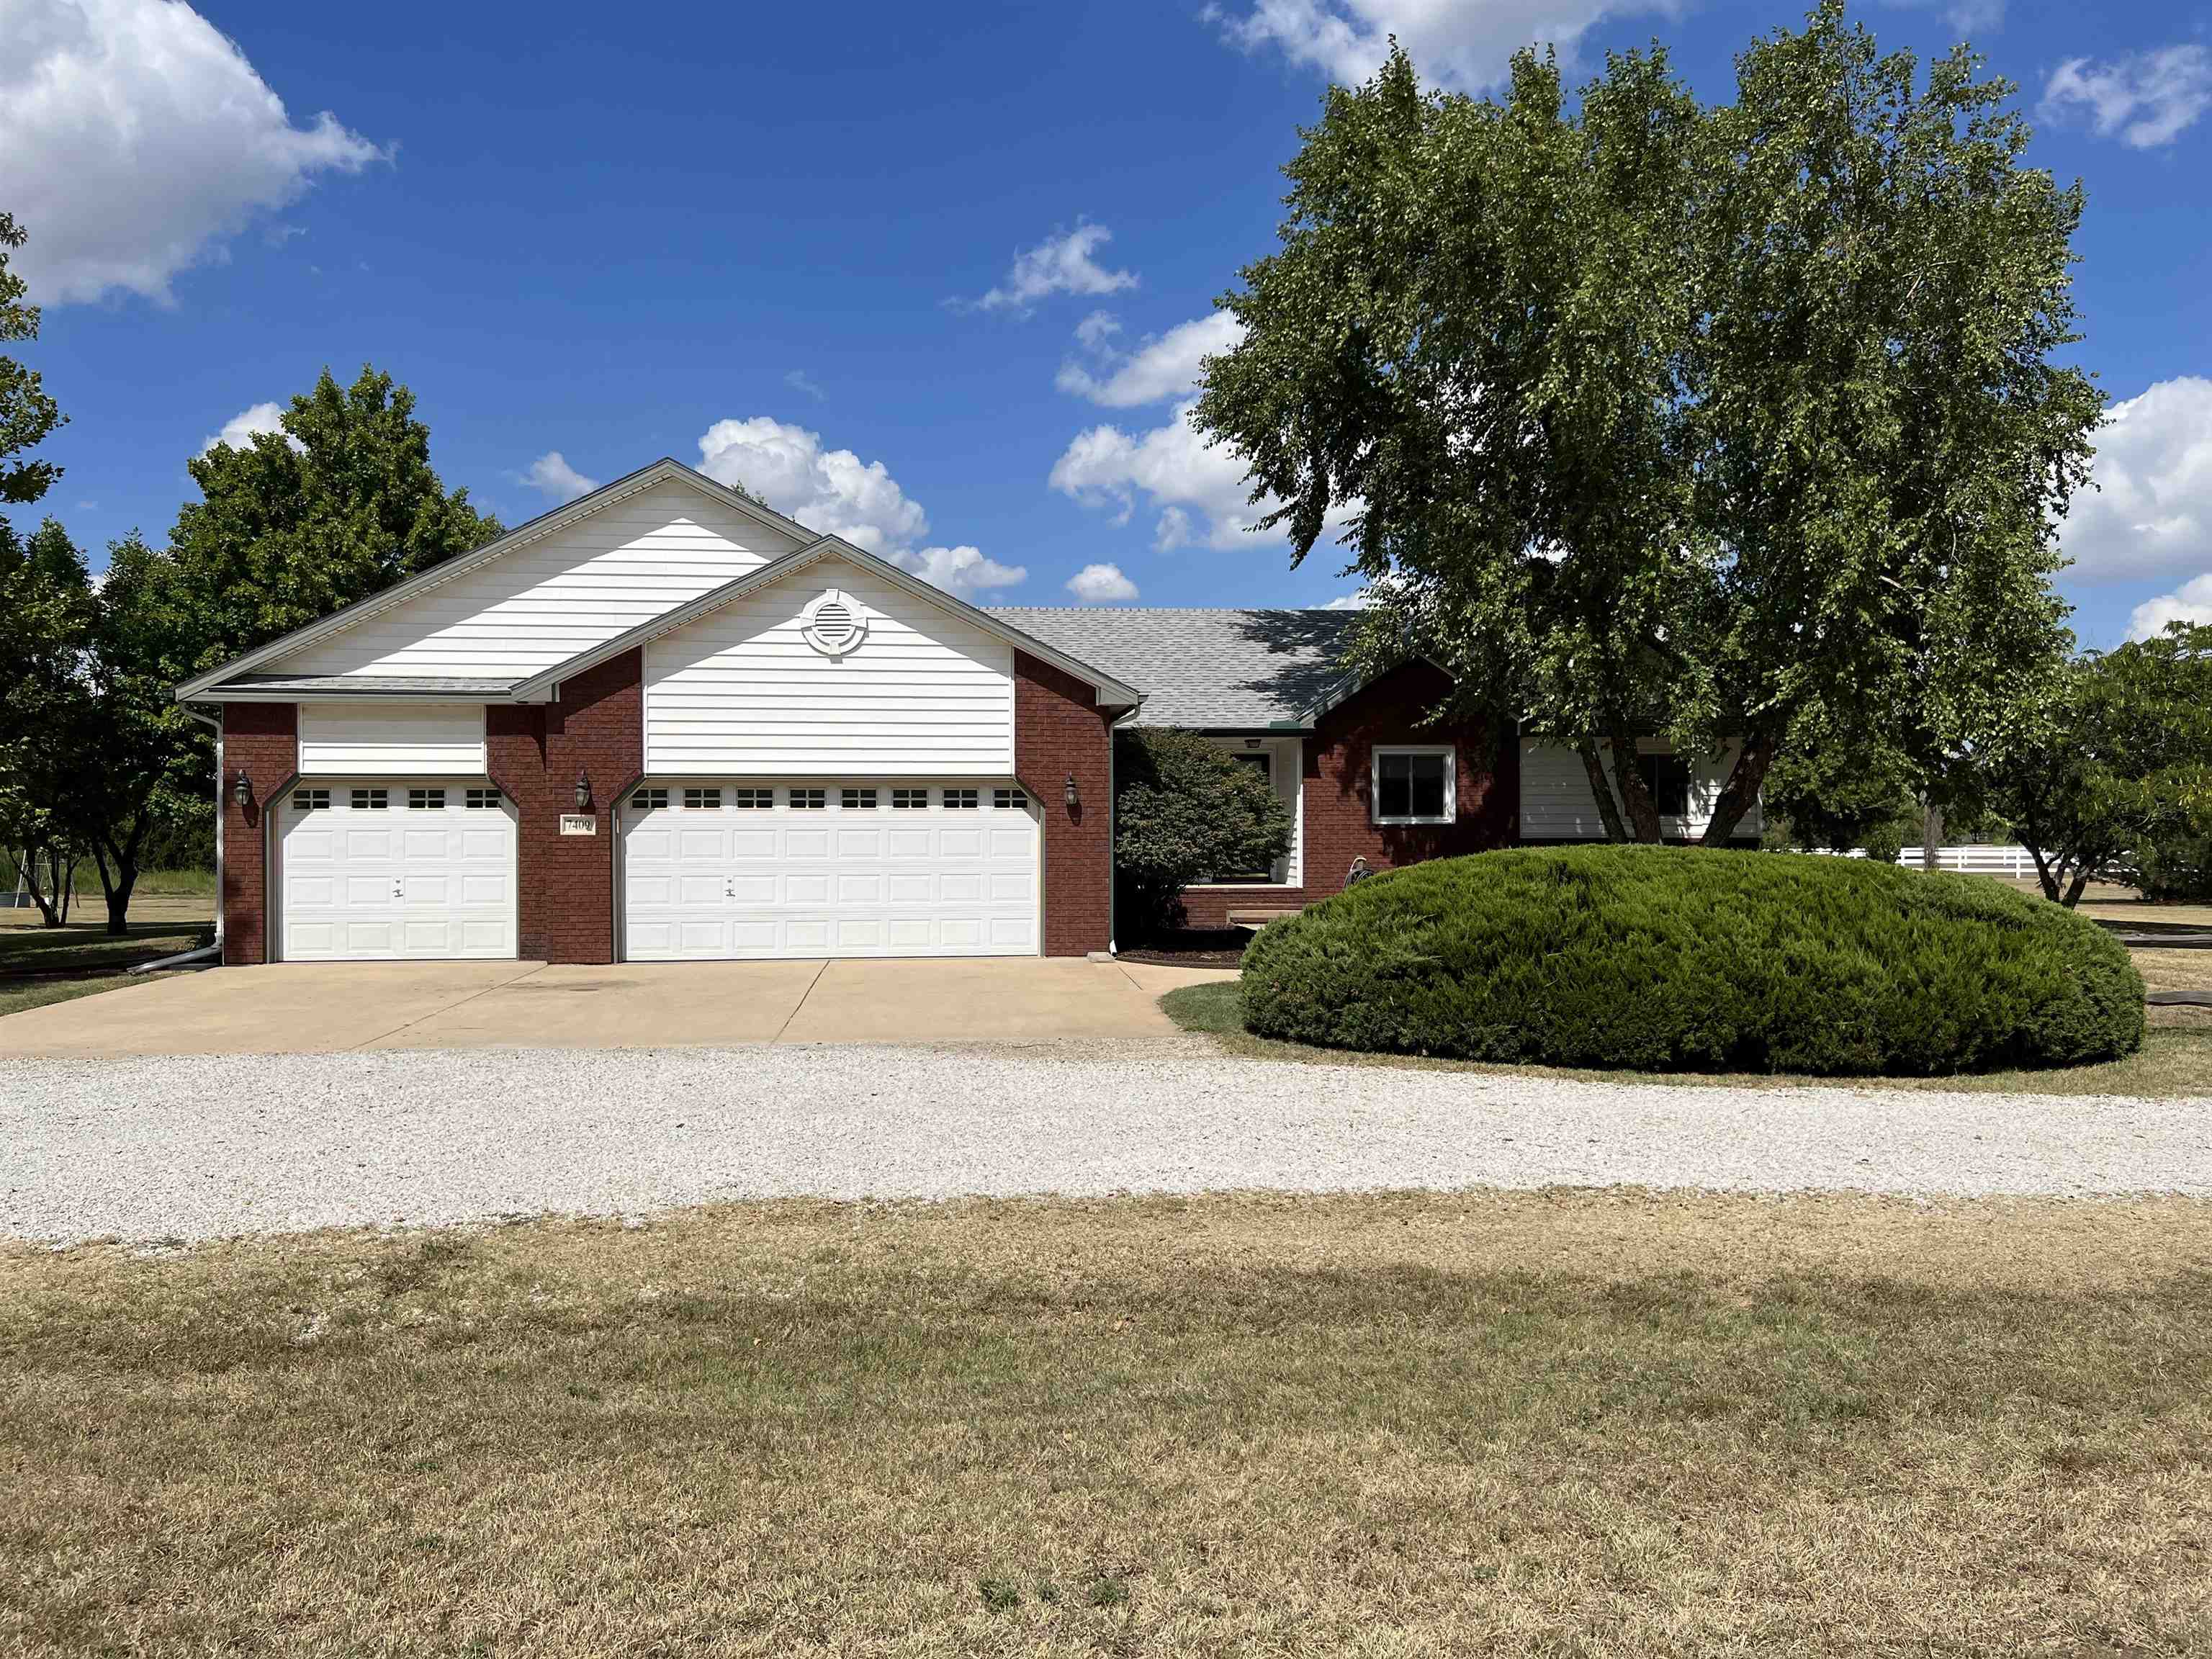 7409 S Creekview St, Clearwater, KS 67026